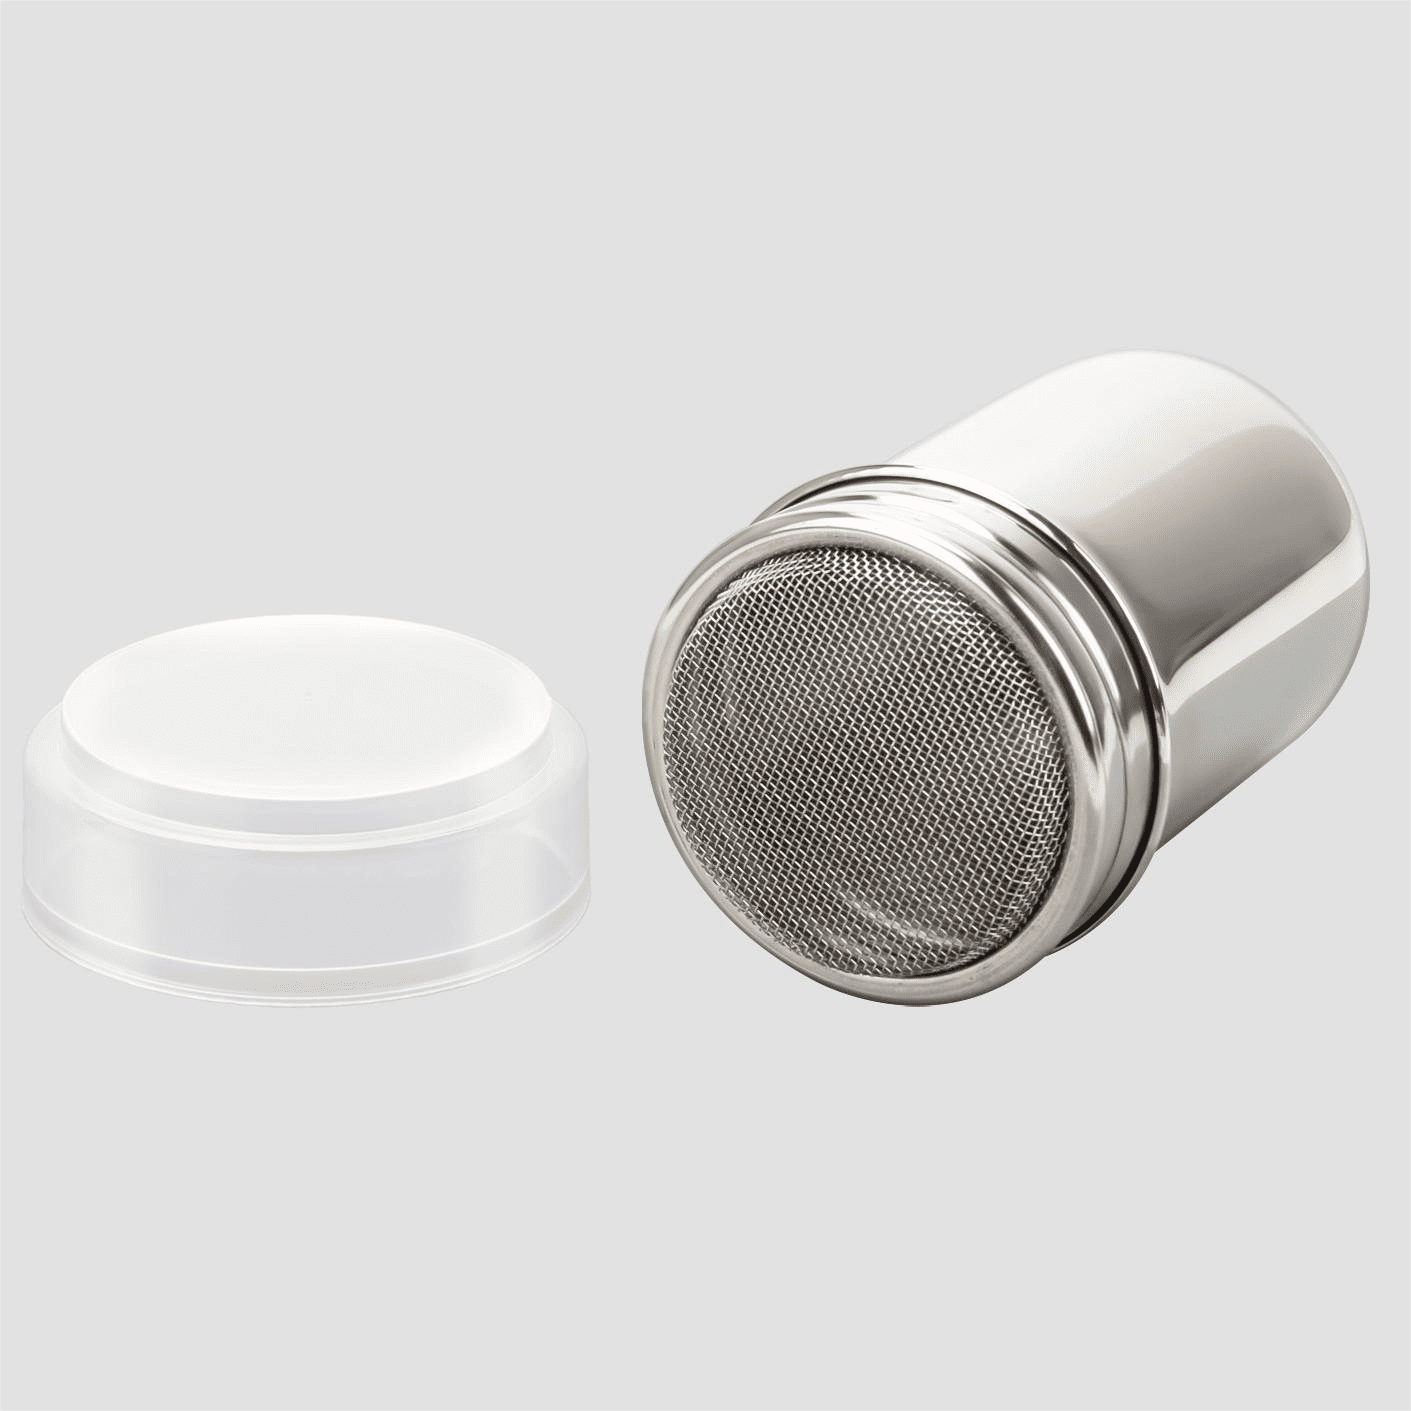 1Pcs Stainless Steel Powder Sugar Shaker Duster with Lid, Fine Mesh Shaker  Powder Cans for baking soda Cocoa Cornstarch Coffee Flour ect